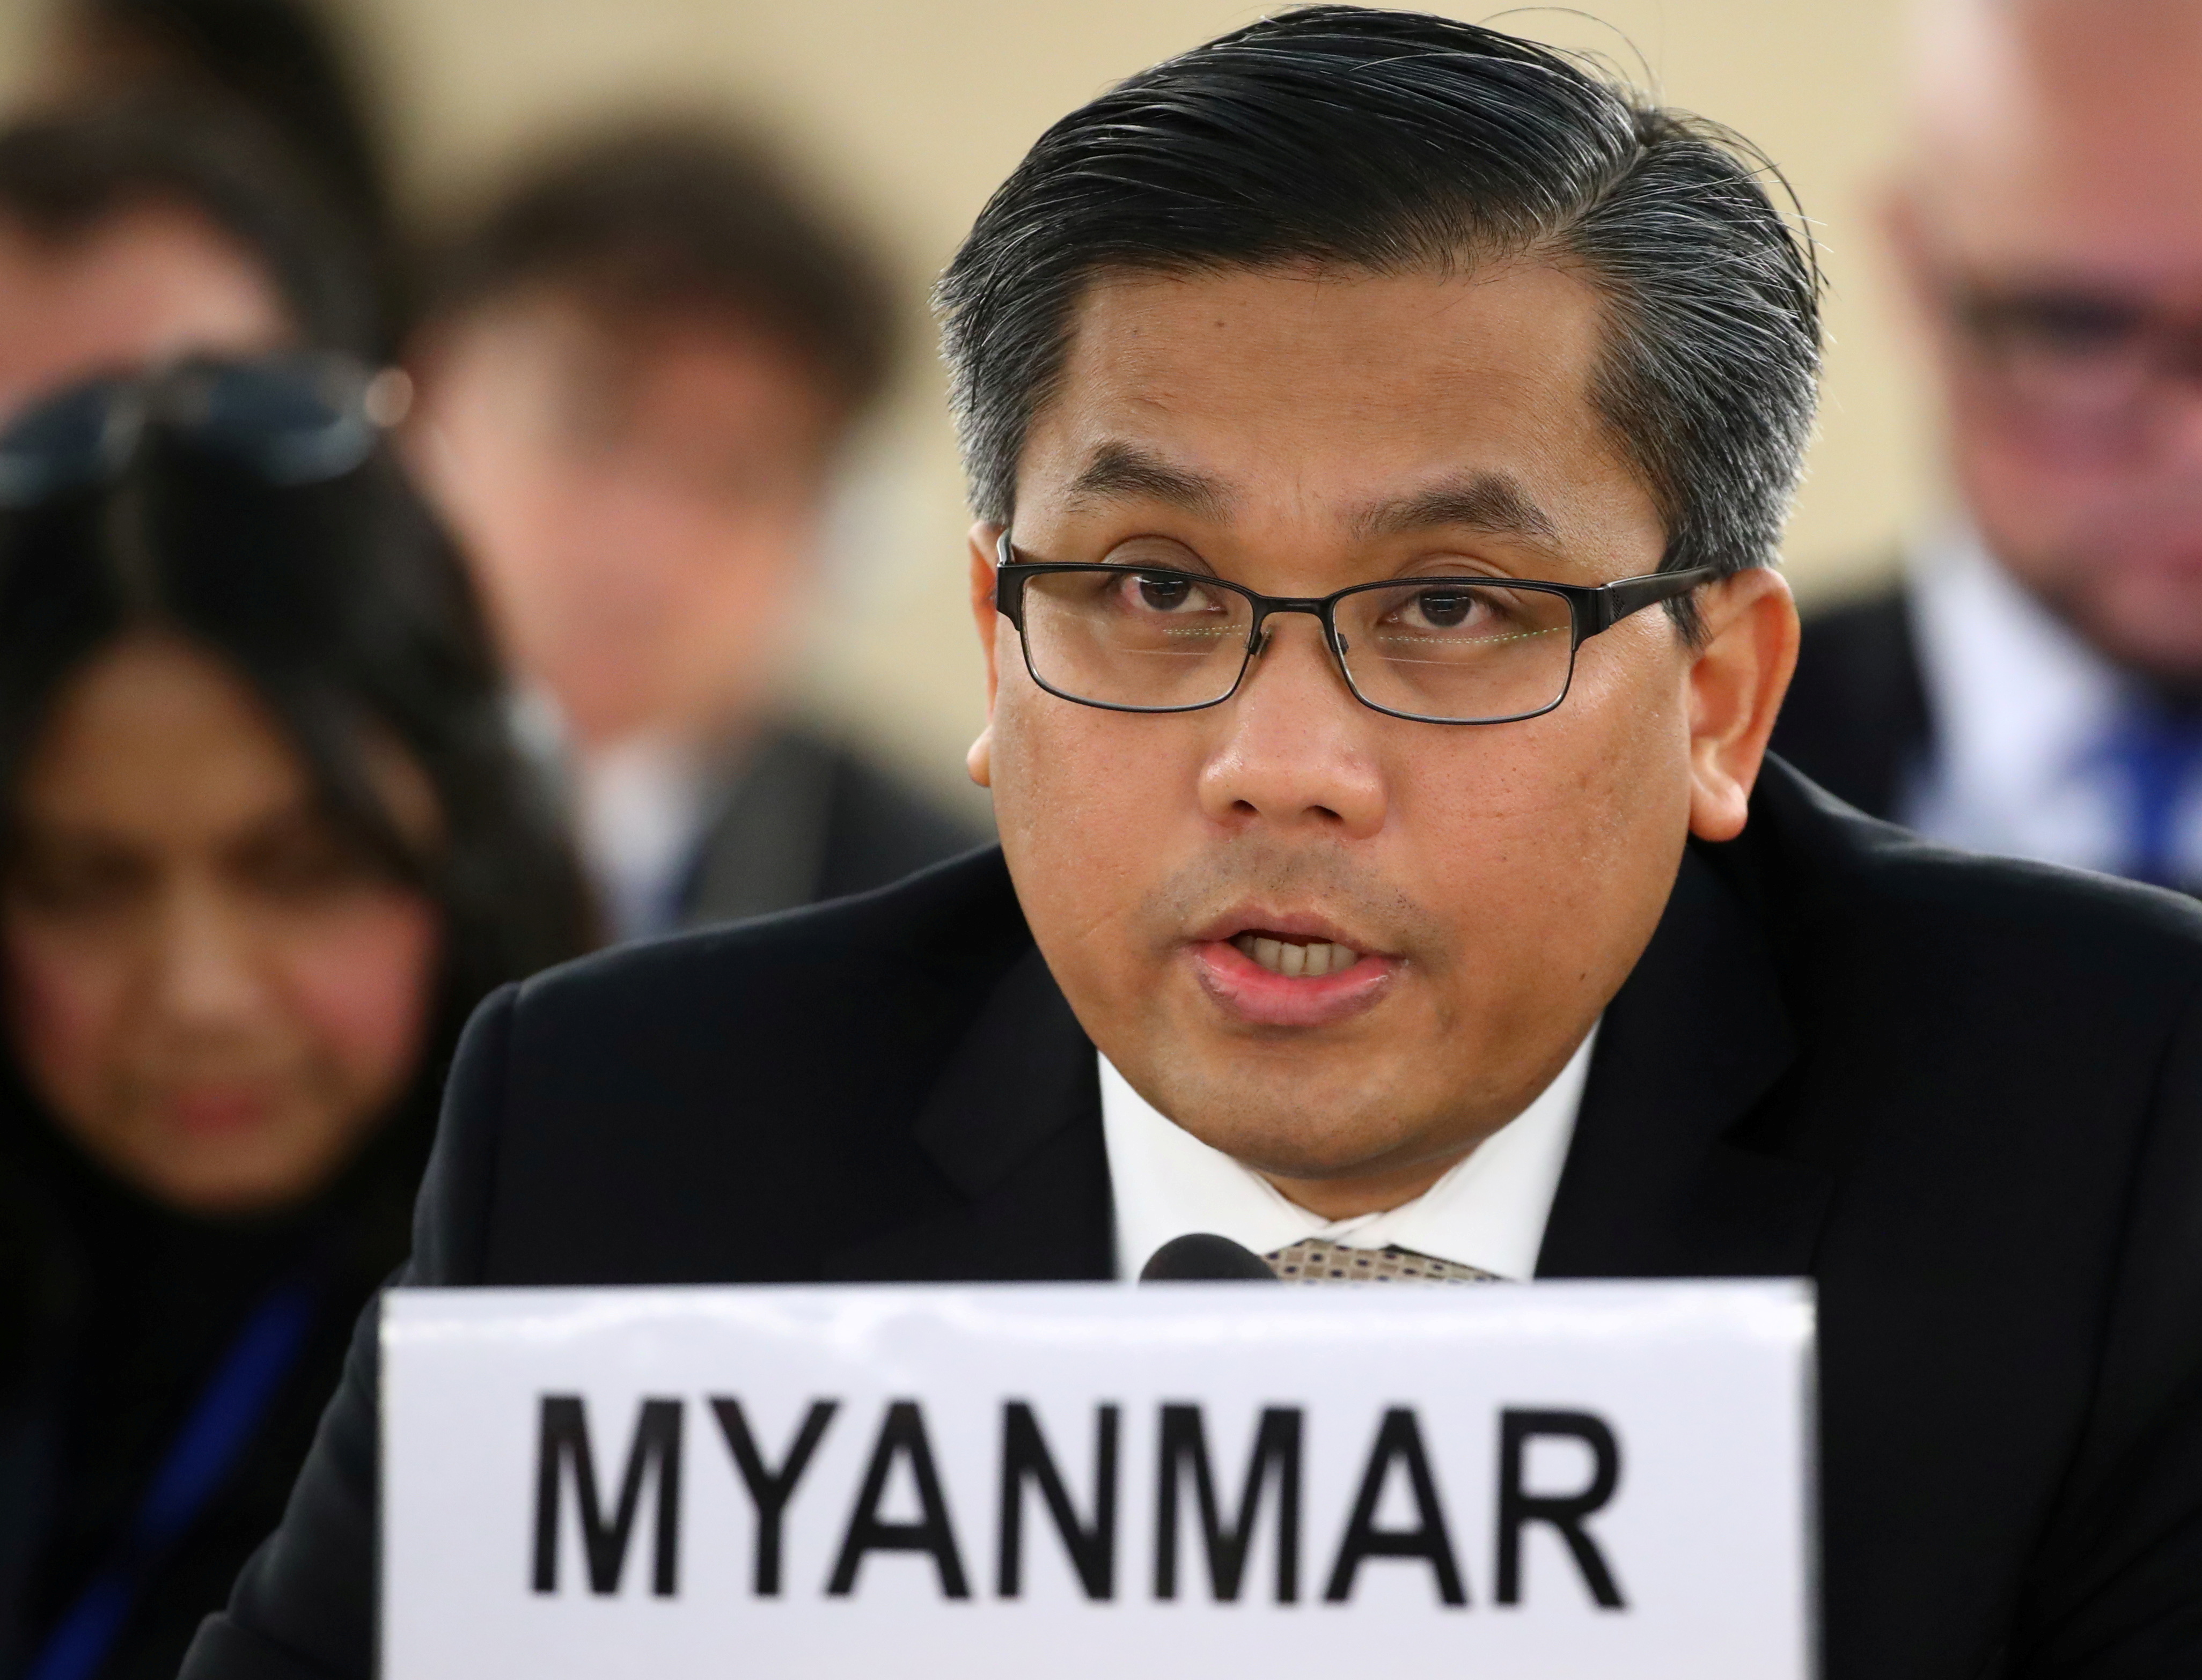 Myanmar's ambassador Tun addresses the Human Rights Council at the United Nations in Geneva